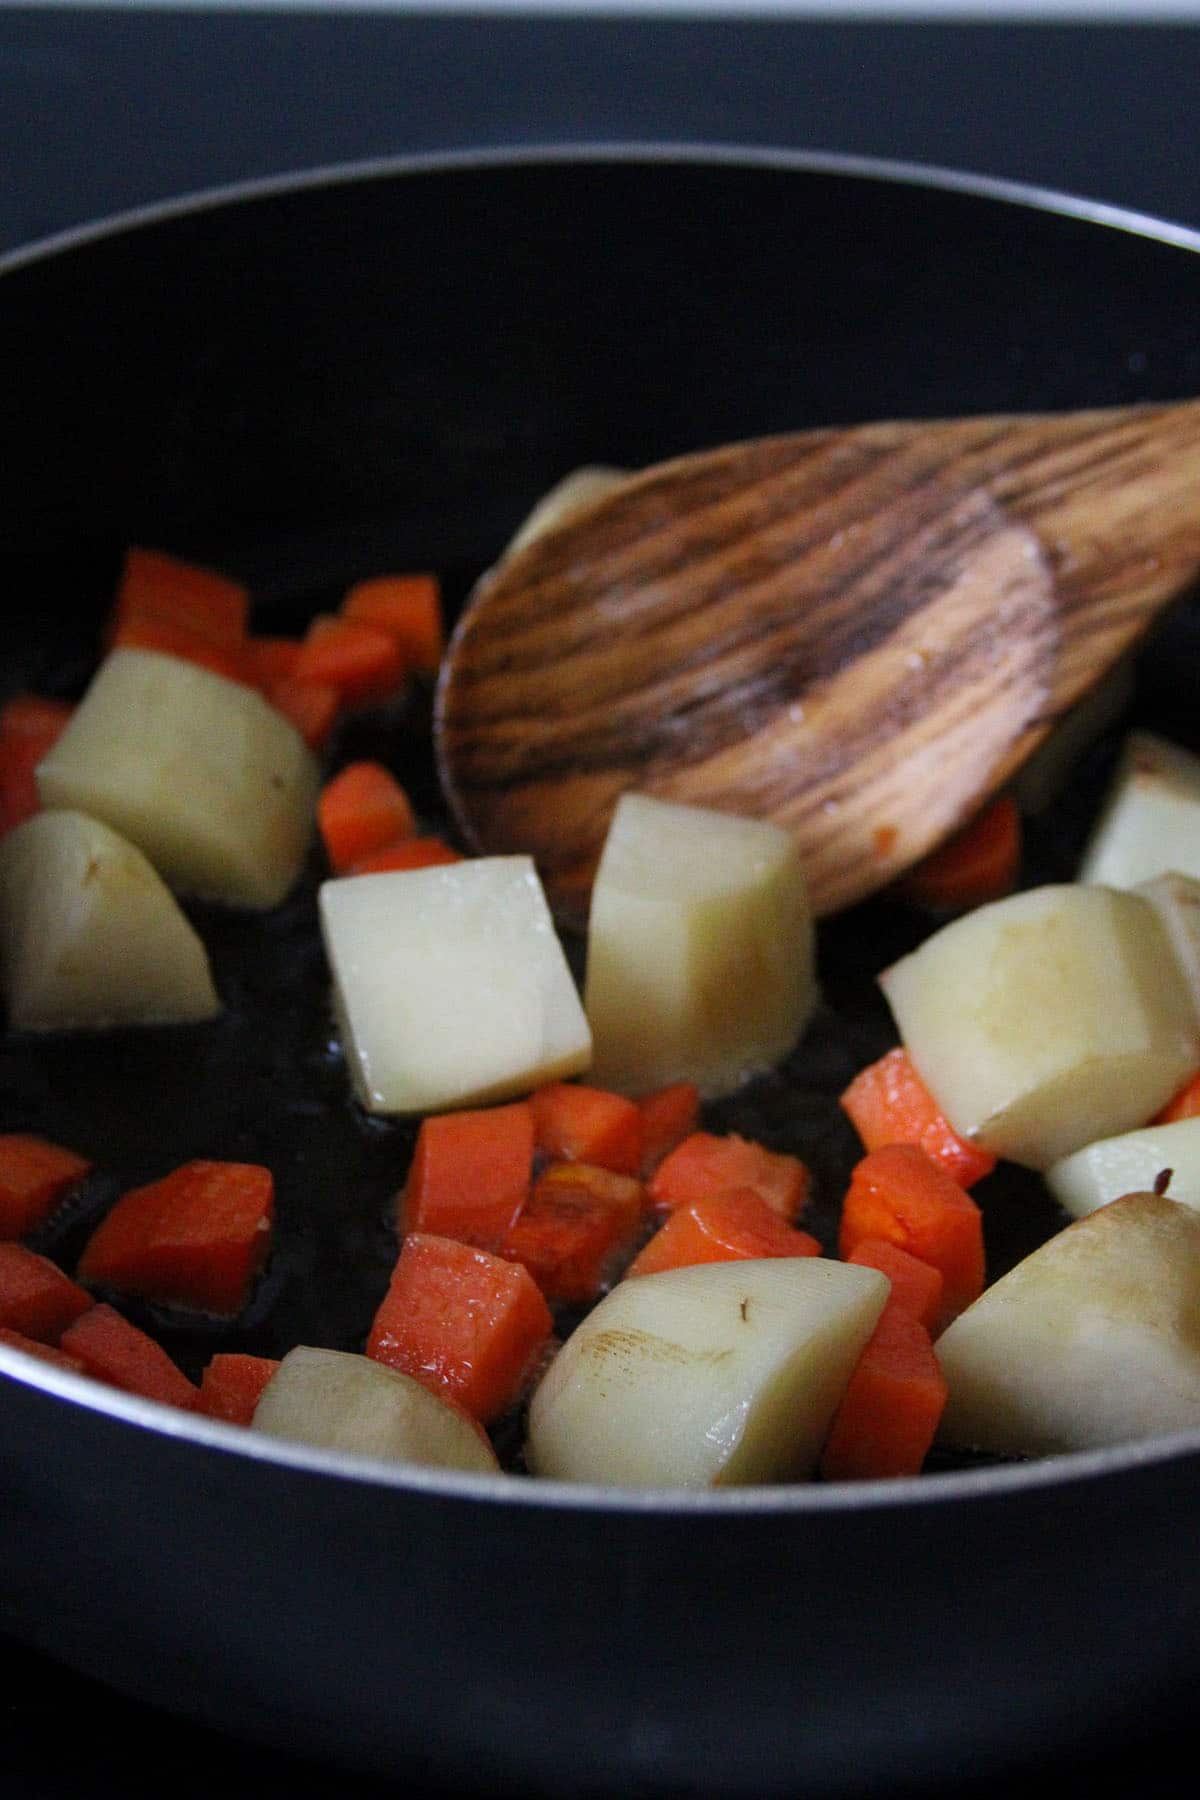 frying potatoes and carrots in a pan